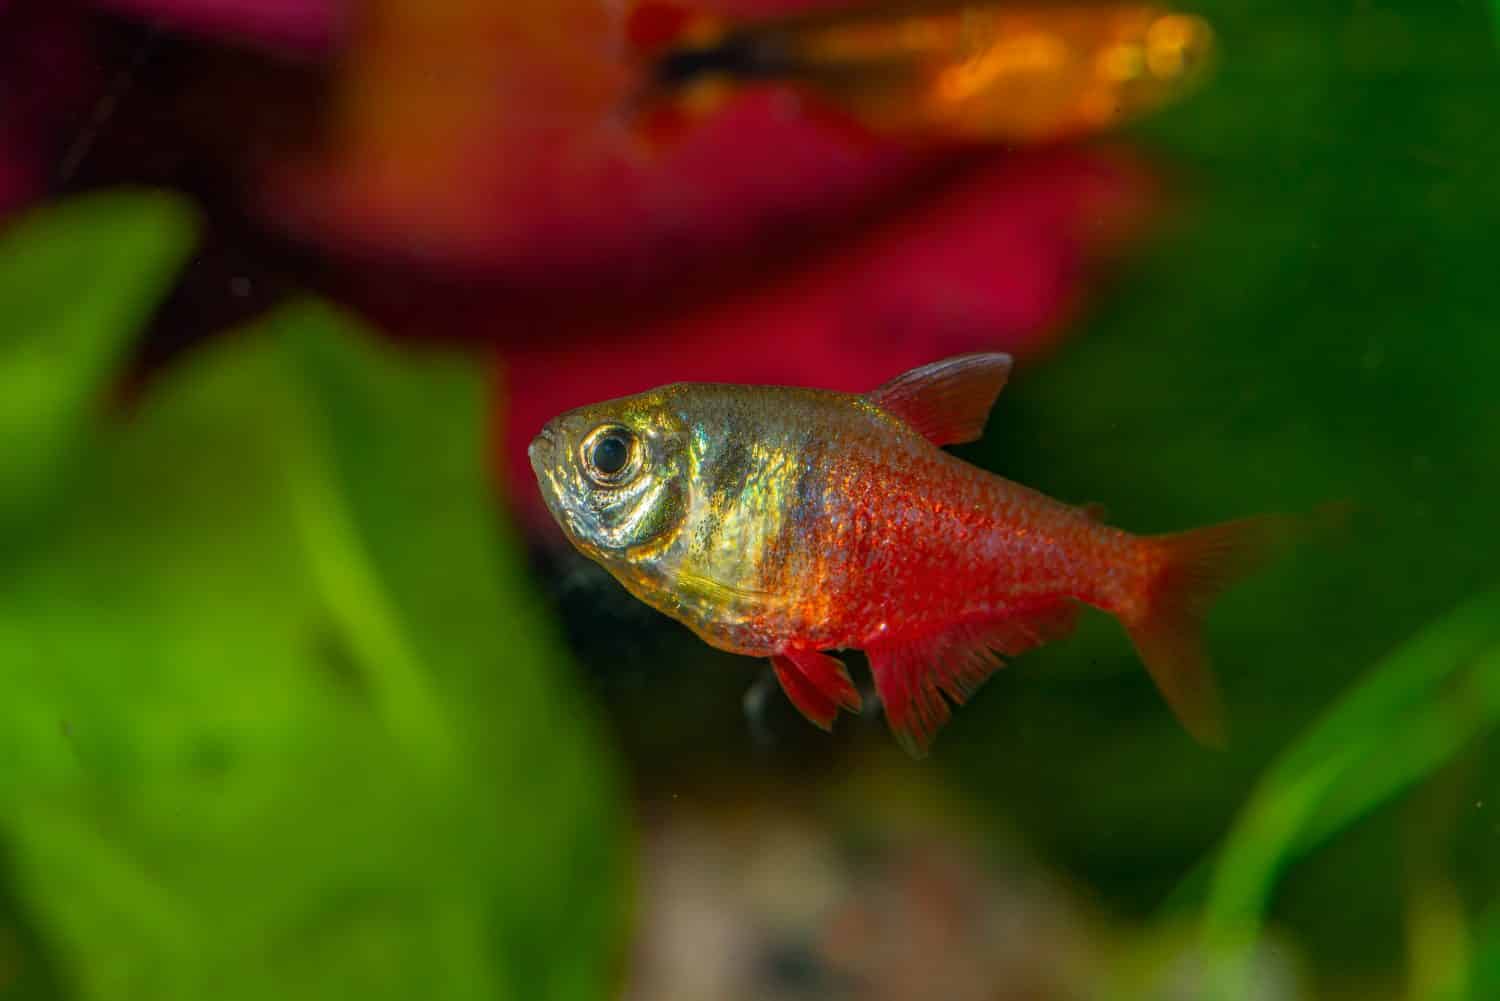 The flame tetra (Hyphessobrycon flammeus), also known as the red tetra or Rio tetra, is a small freshwater fish of the characin family Characidae.